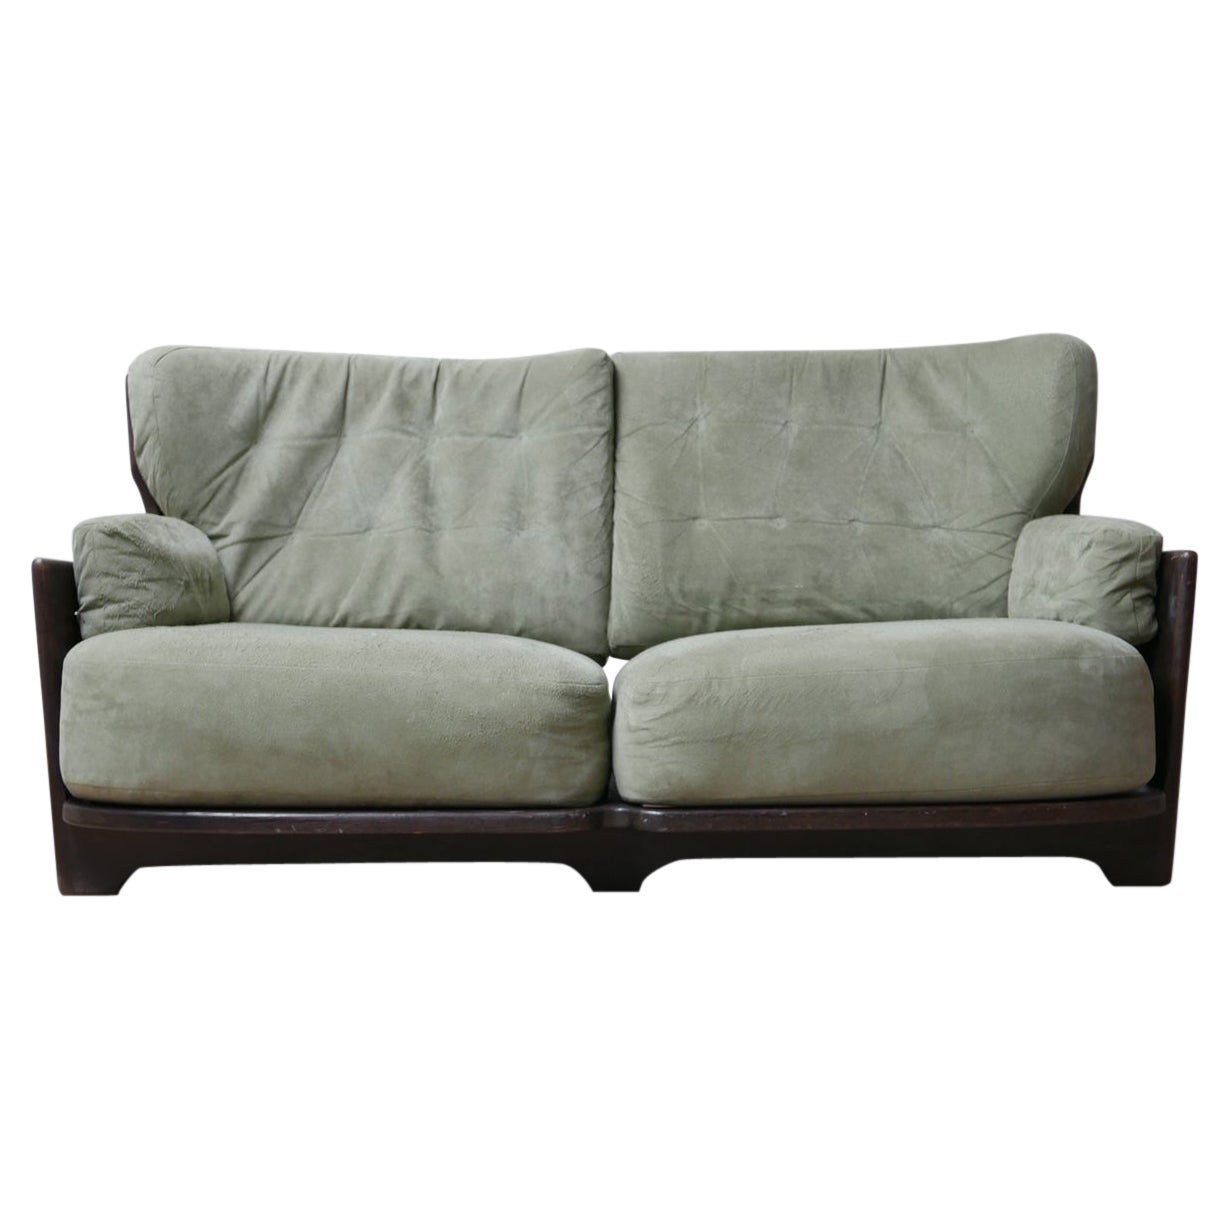 Eboinsed Oak Guillerme et Chambron French Mid-Century 'Denis' Two Seater Sofa